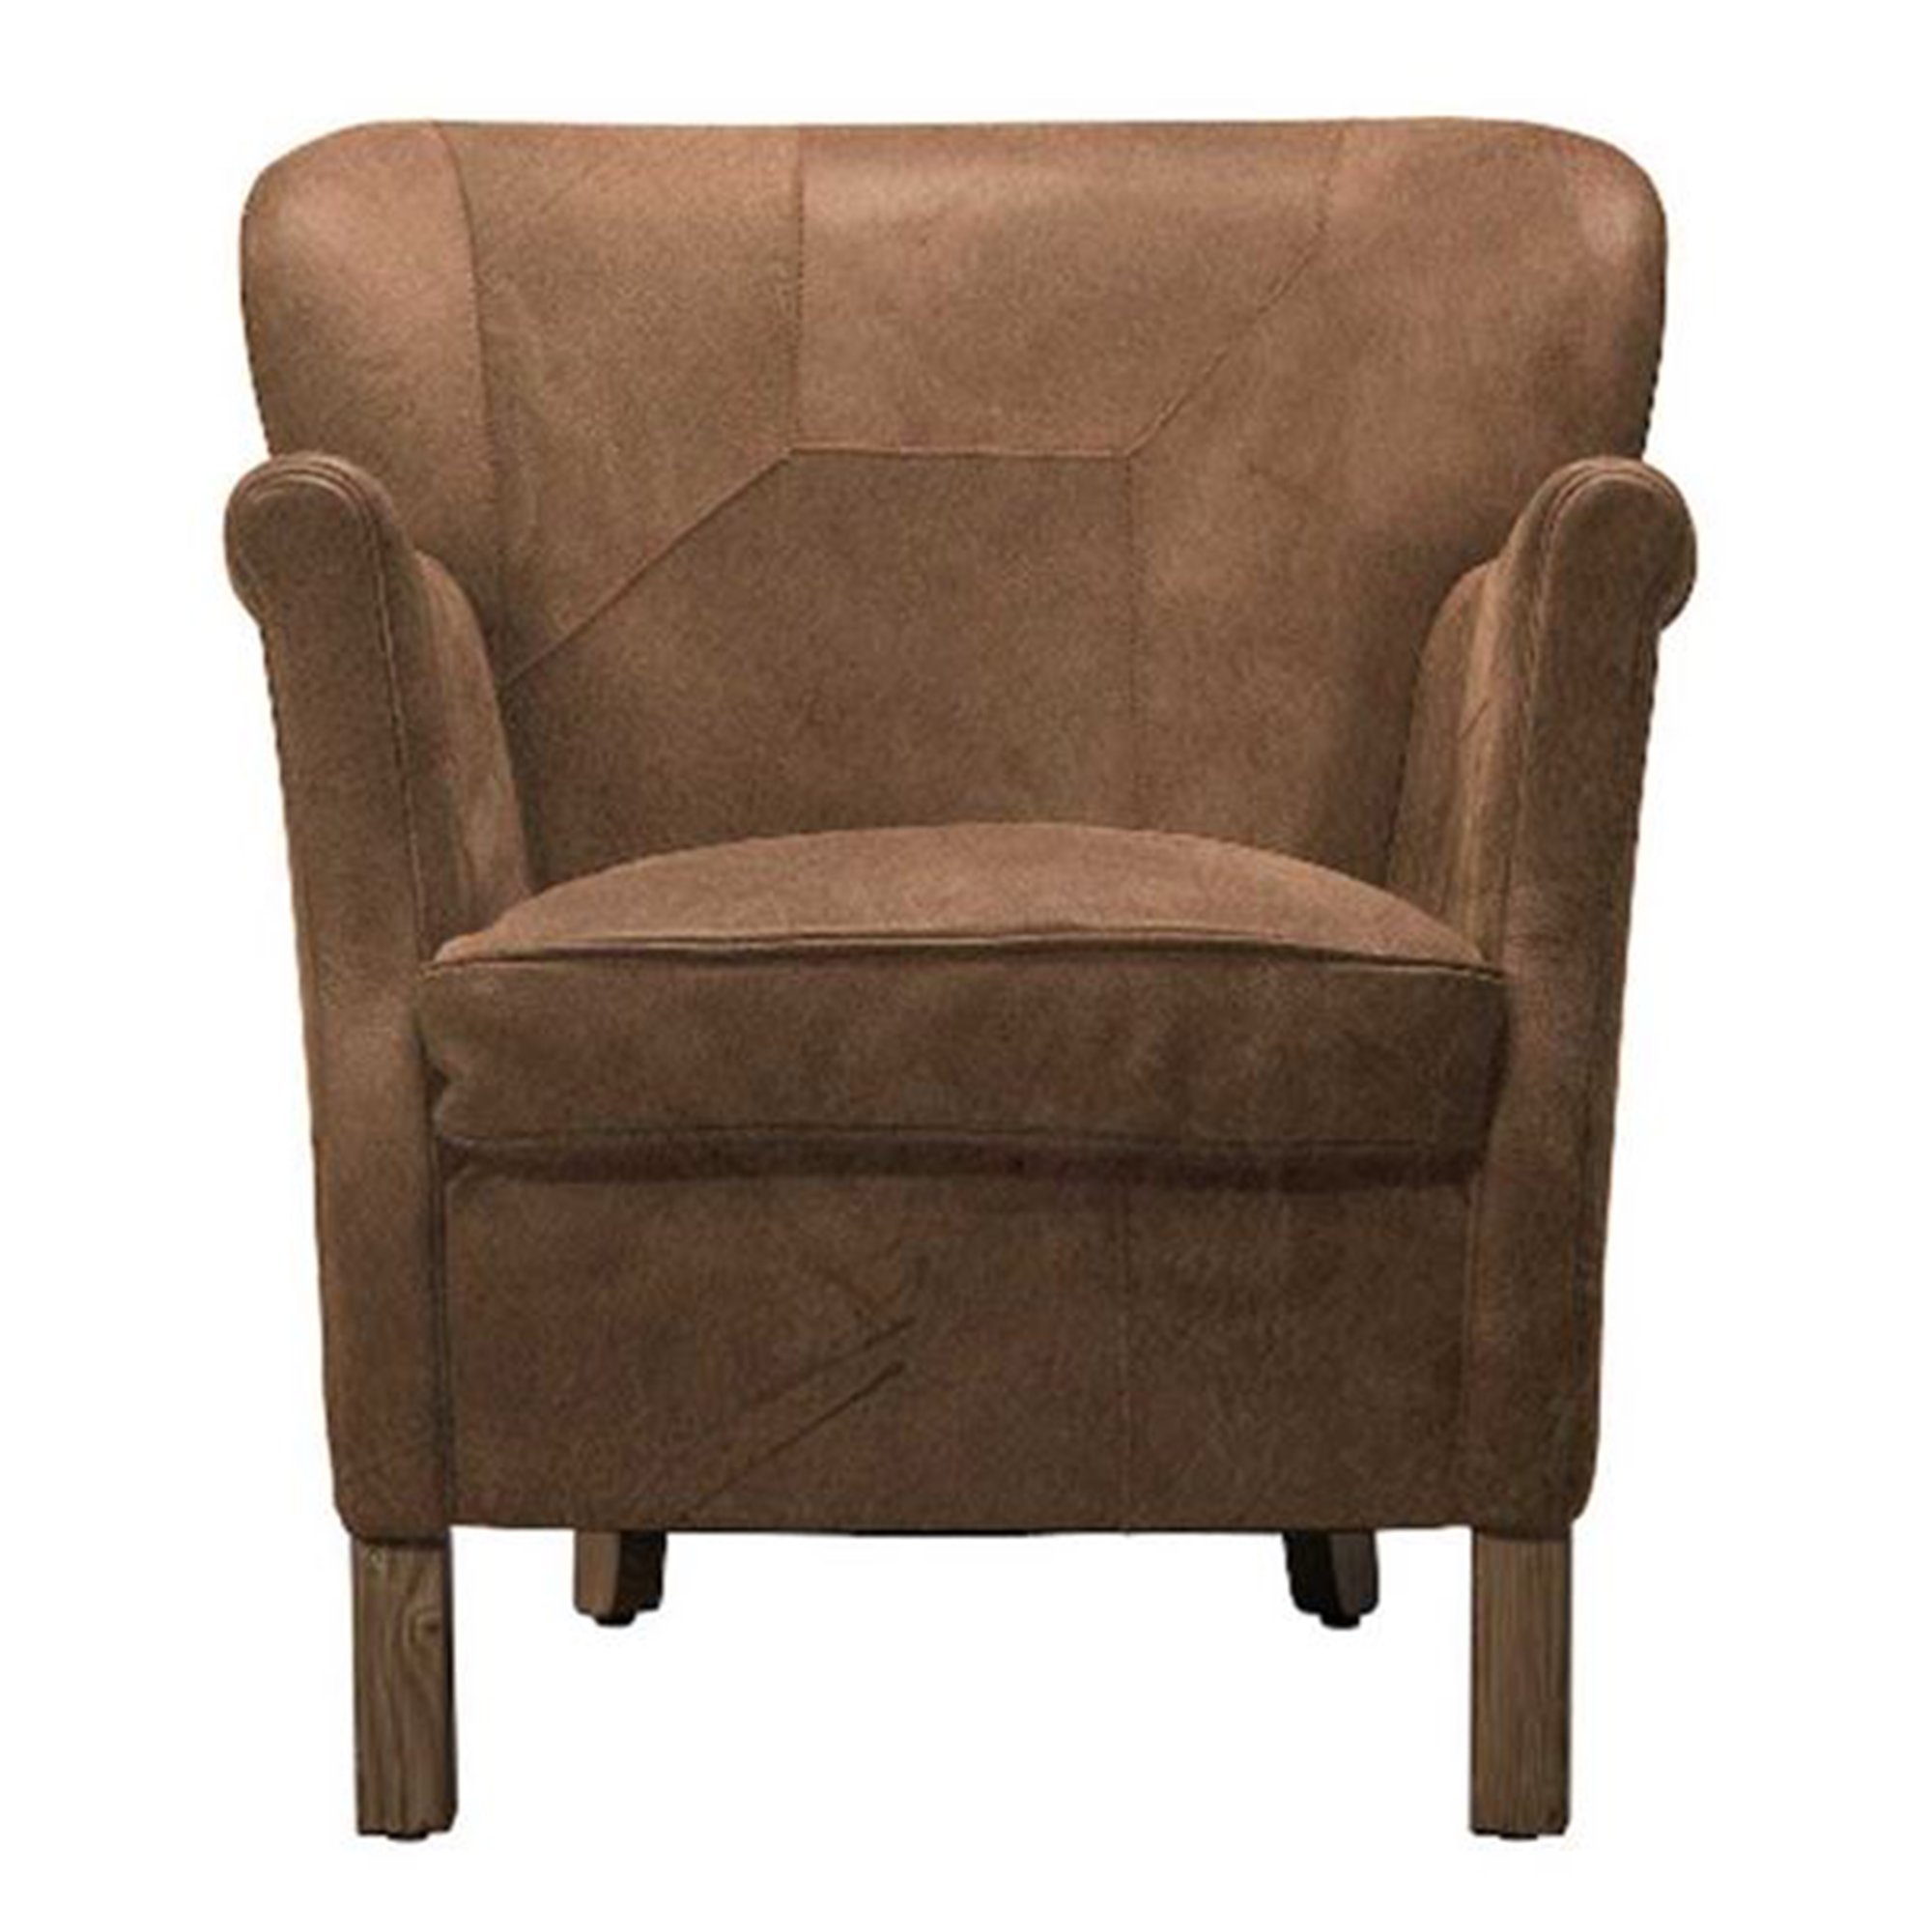 Timothy Oulton Furious Professor Armchair, Brown Leather | Barker & Stonehouse